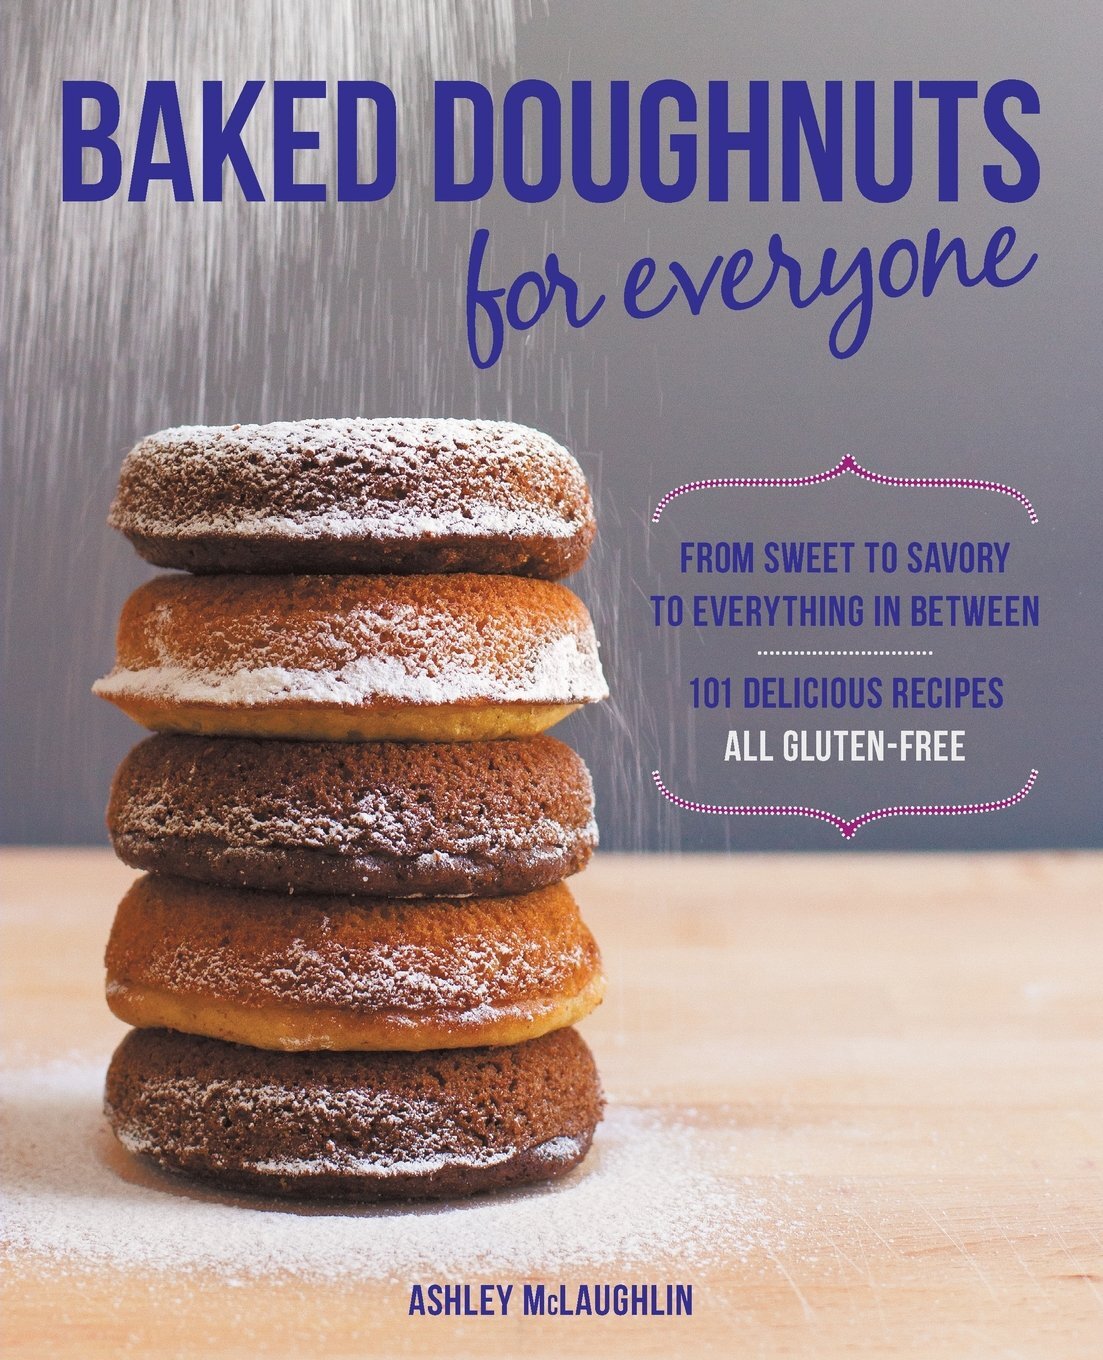 baked-dougnuts-for-everyone.jpg